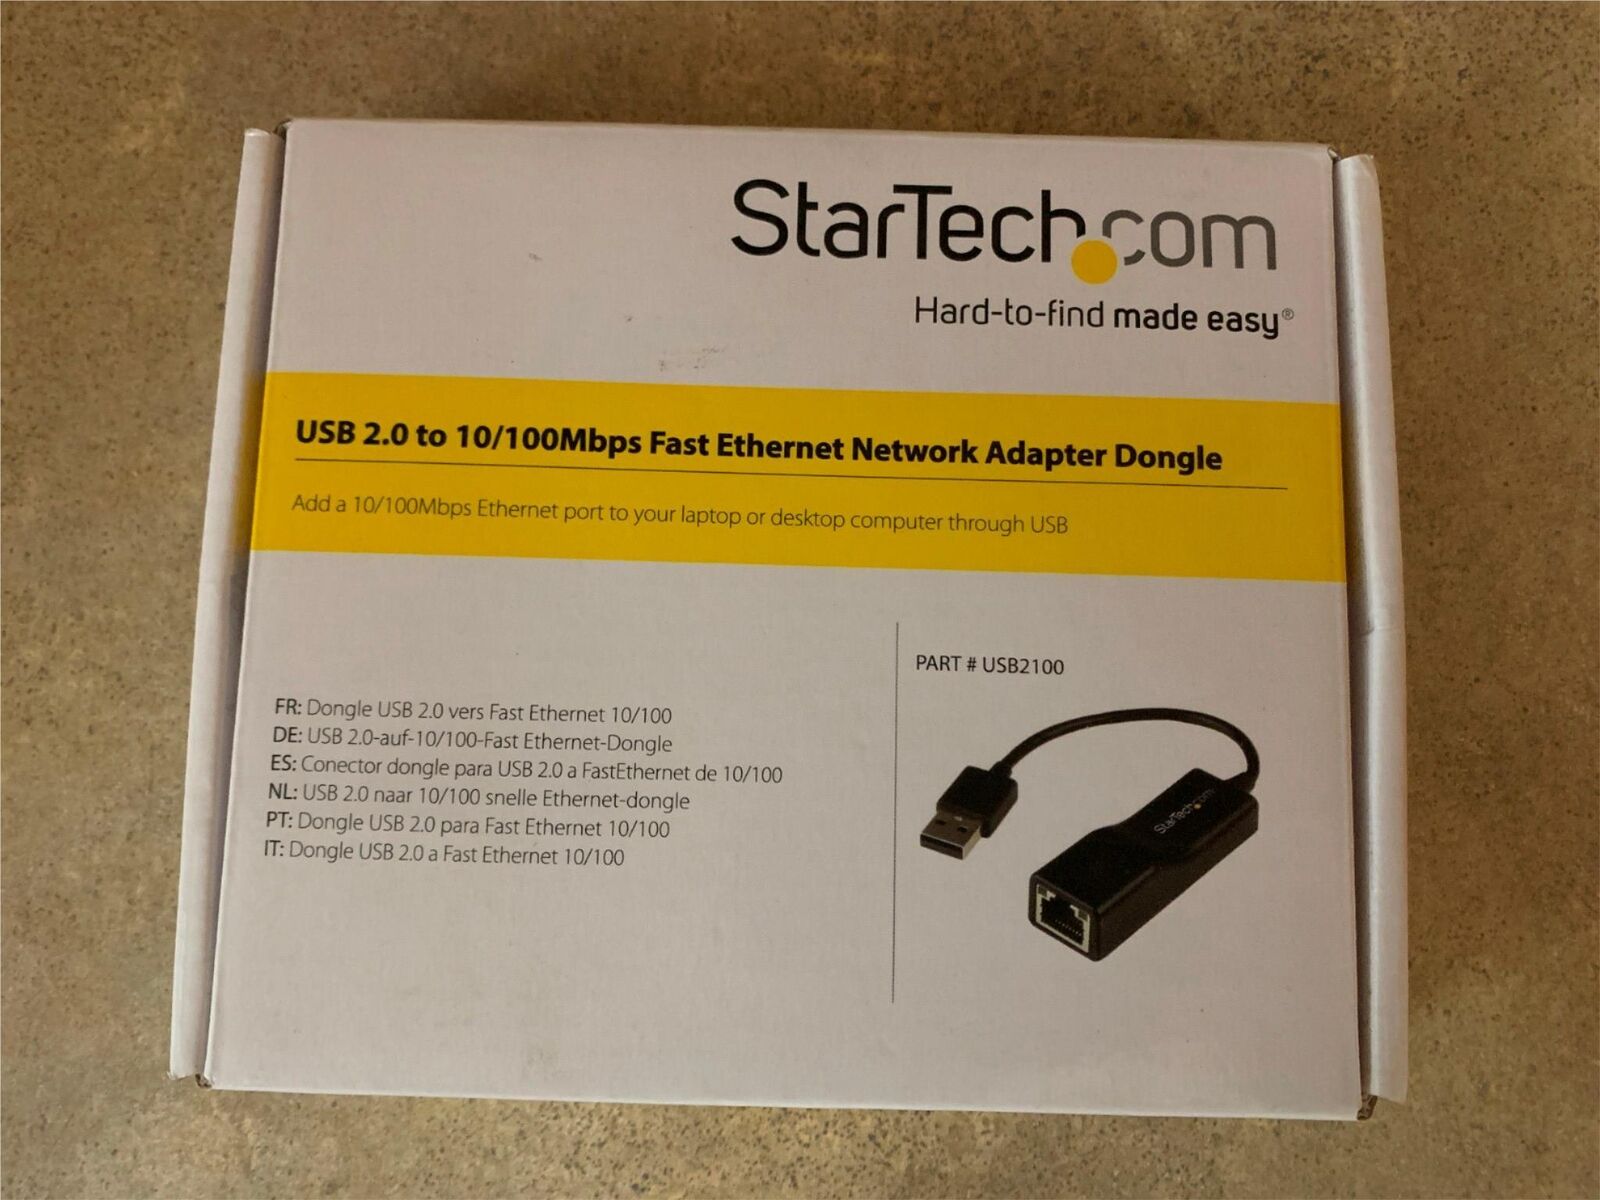 STARTECH USB2100 USB 2.0 TO 10/100 MBPS ETHERNET NETWORK ADAPTER DONGLE N3-2